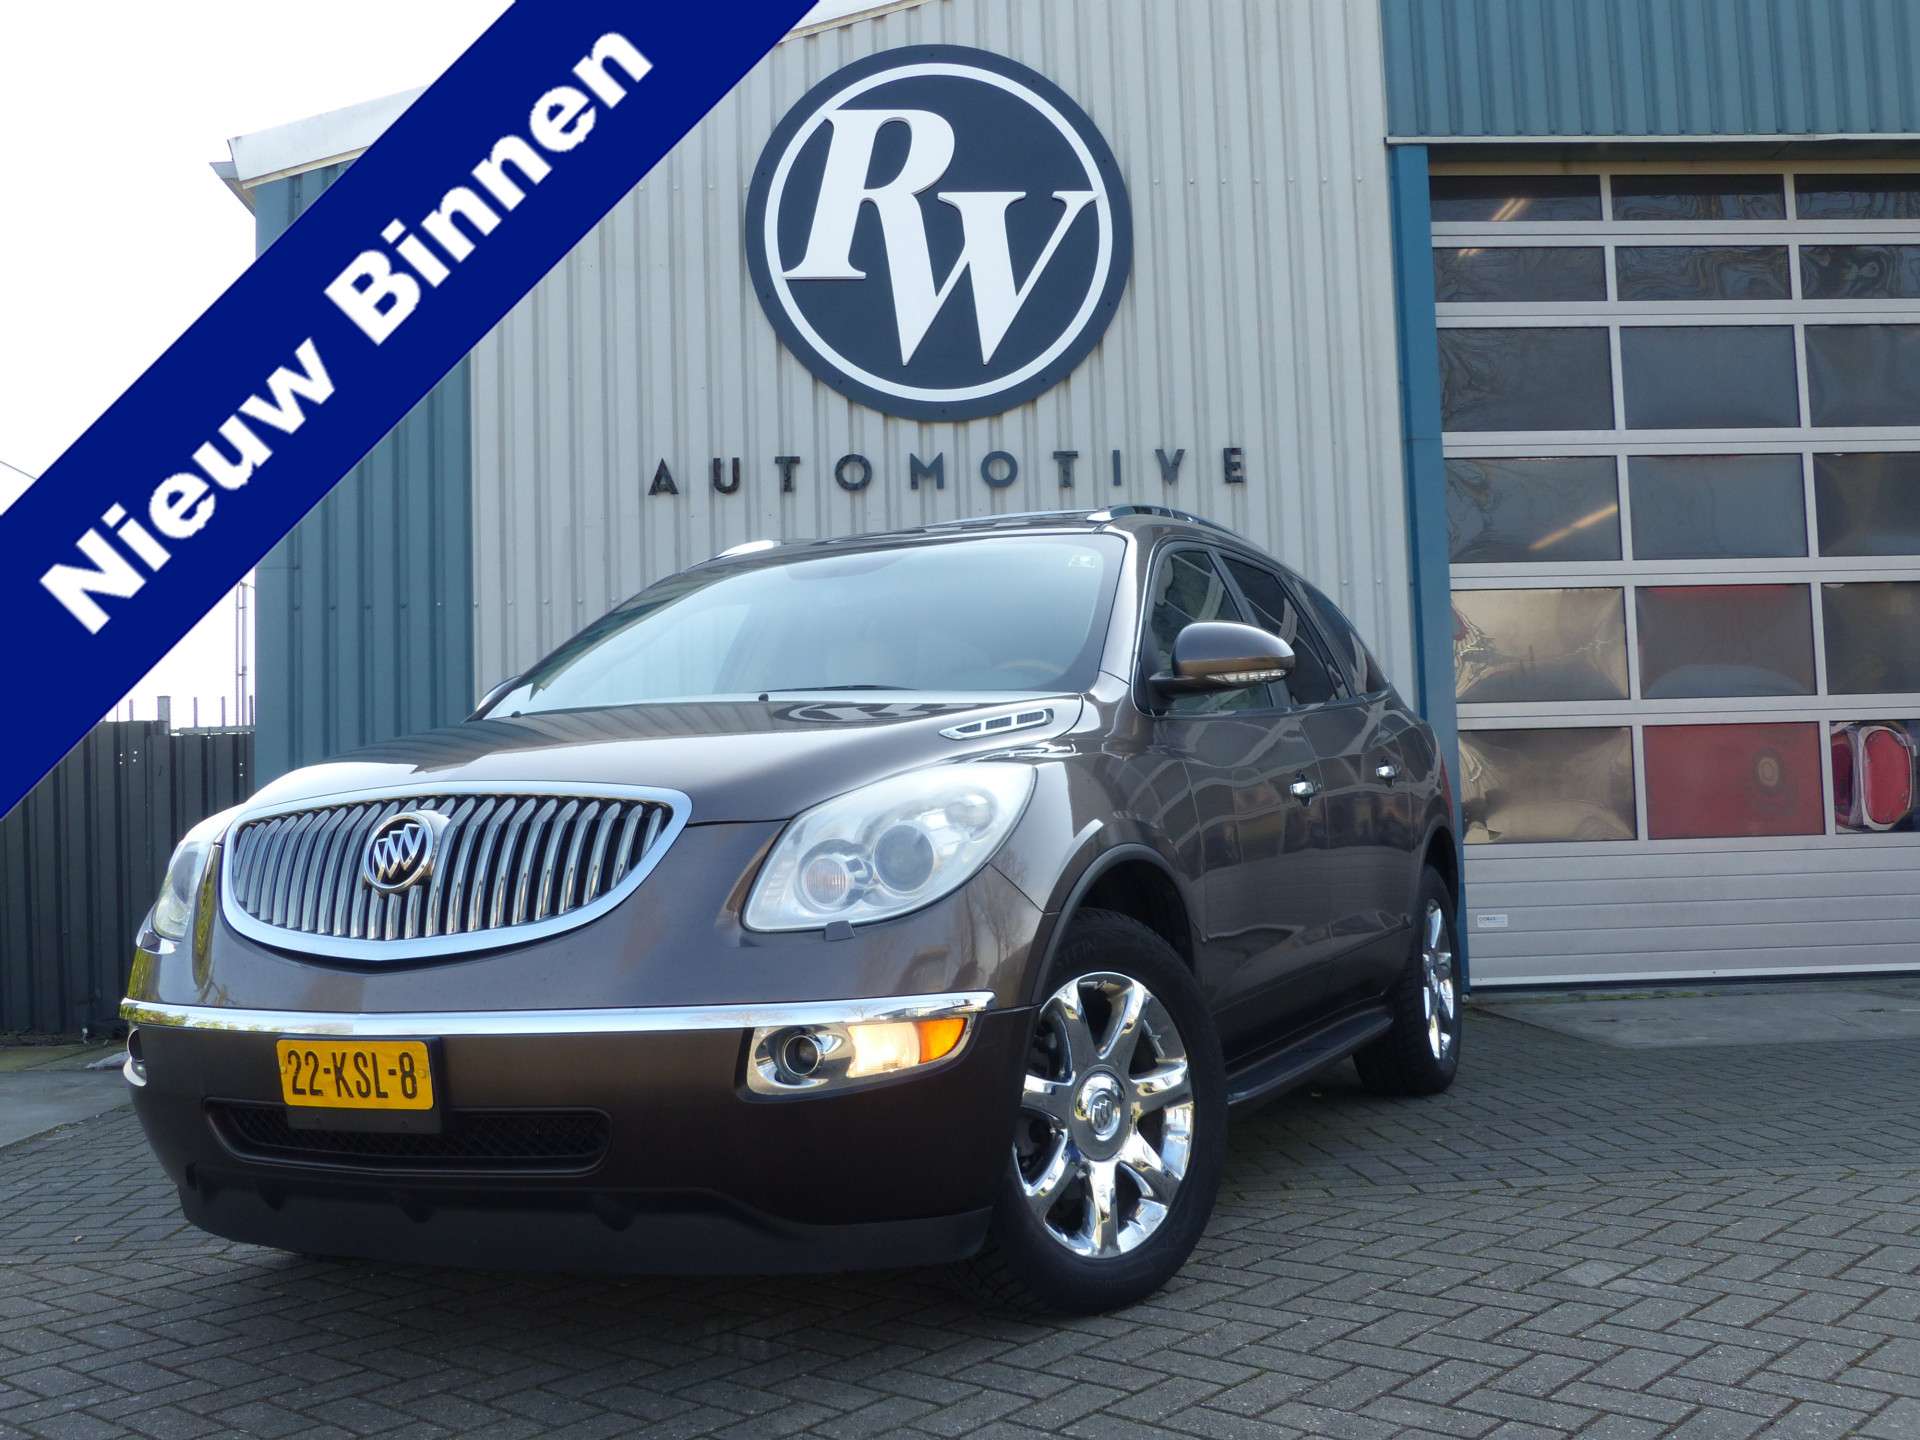 Buick Enclave Off-Road/Pick-up in Grey used in SNEEK for € 6,999.-